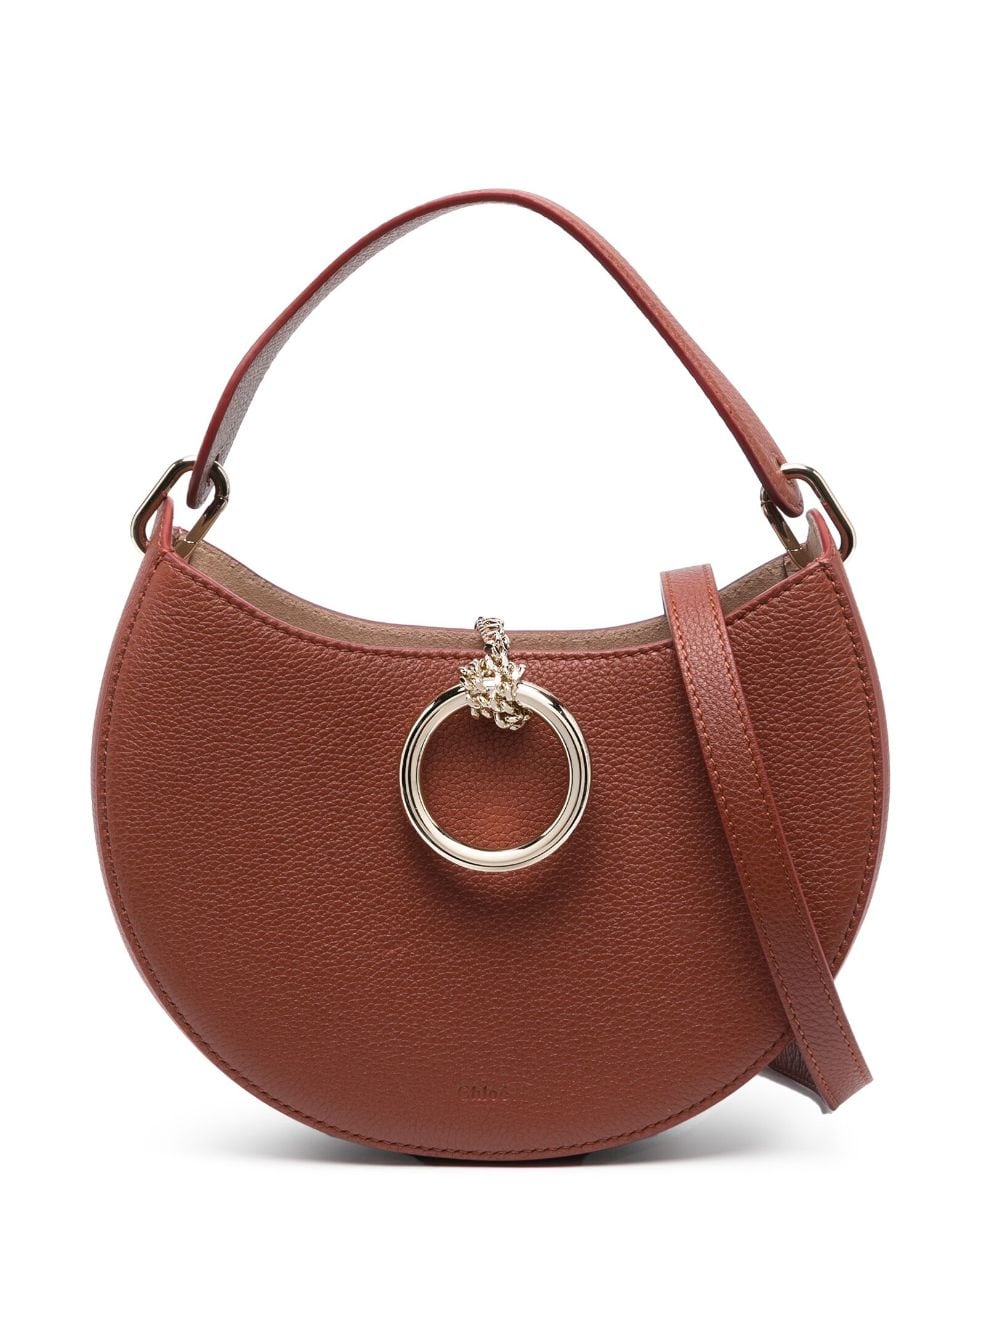 CHLOÉ Smooth Brown Leather Hobo Handbag with Front Metal Detailing and Crossbody Strap